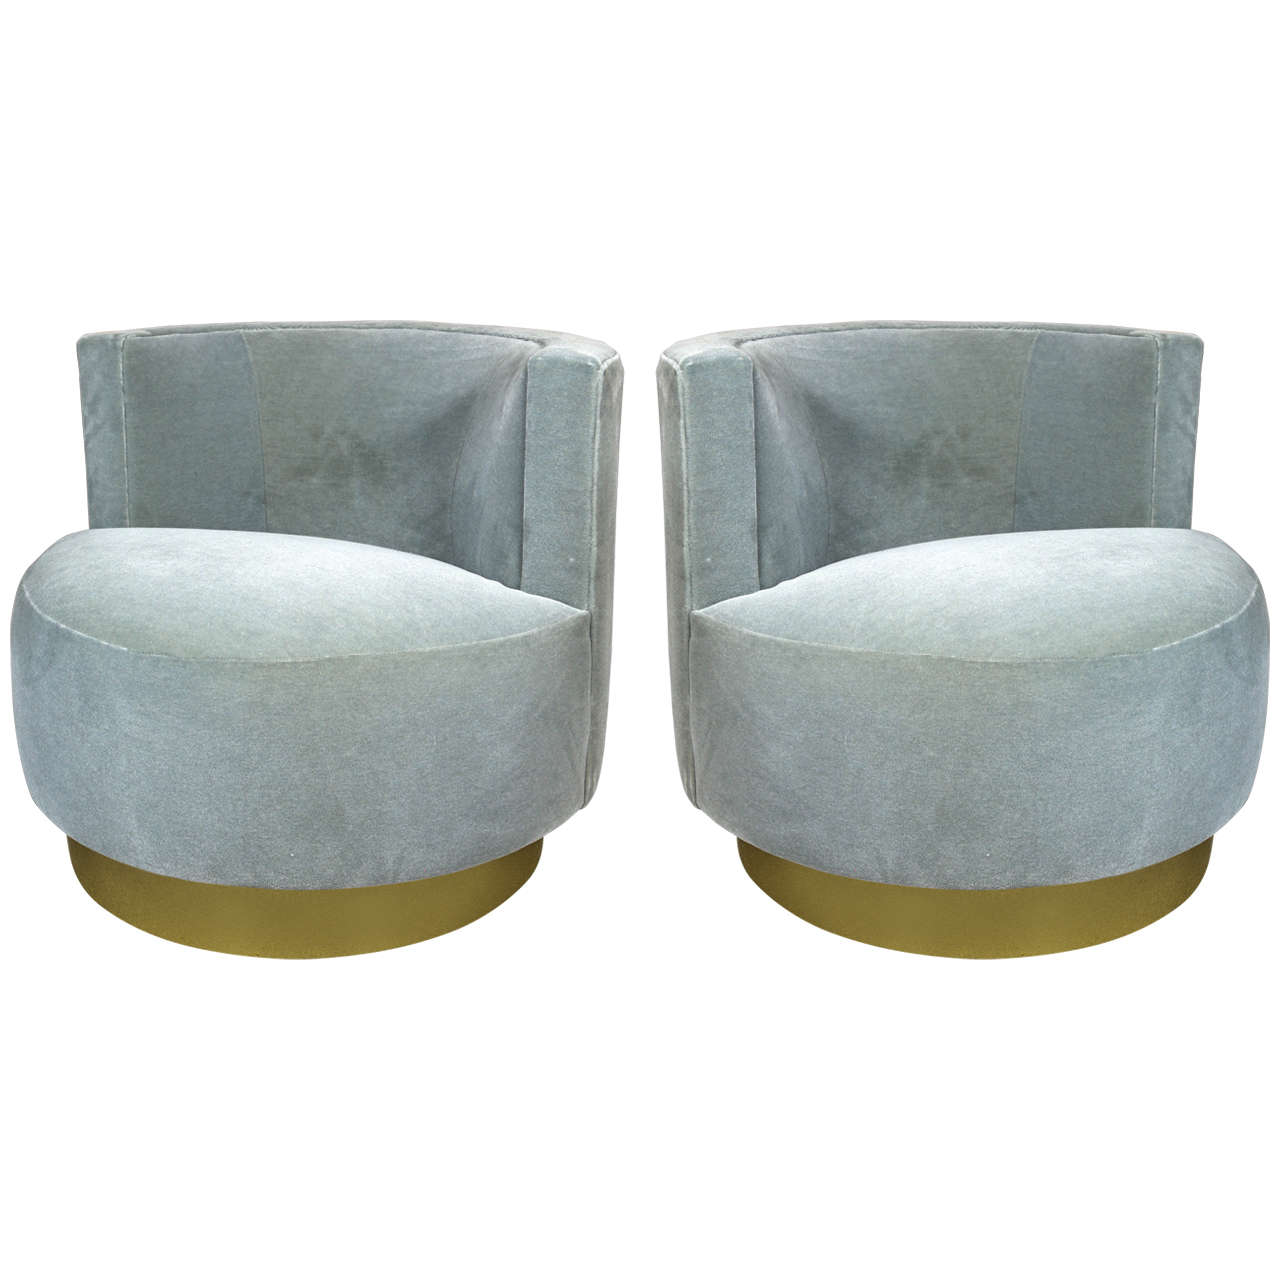 Pair of Swivel Chairs Designed by Steve Chase